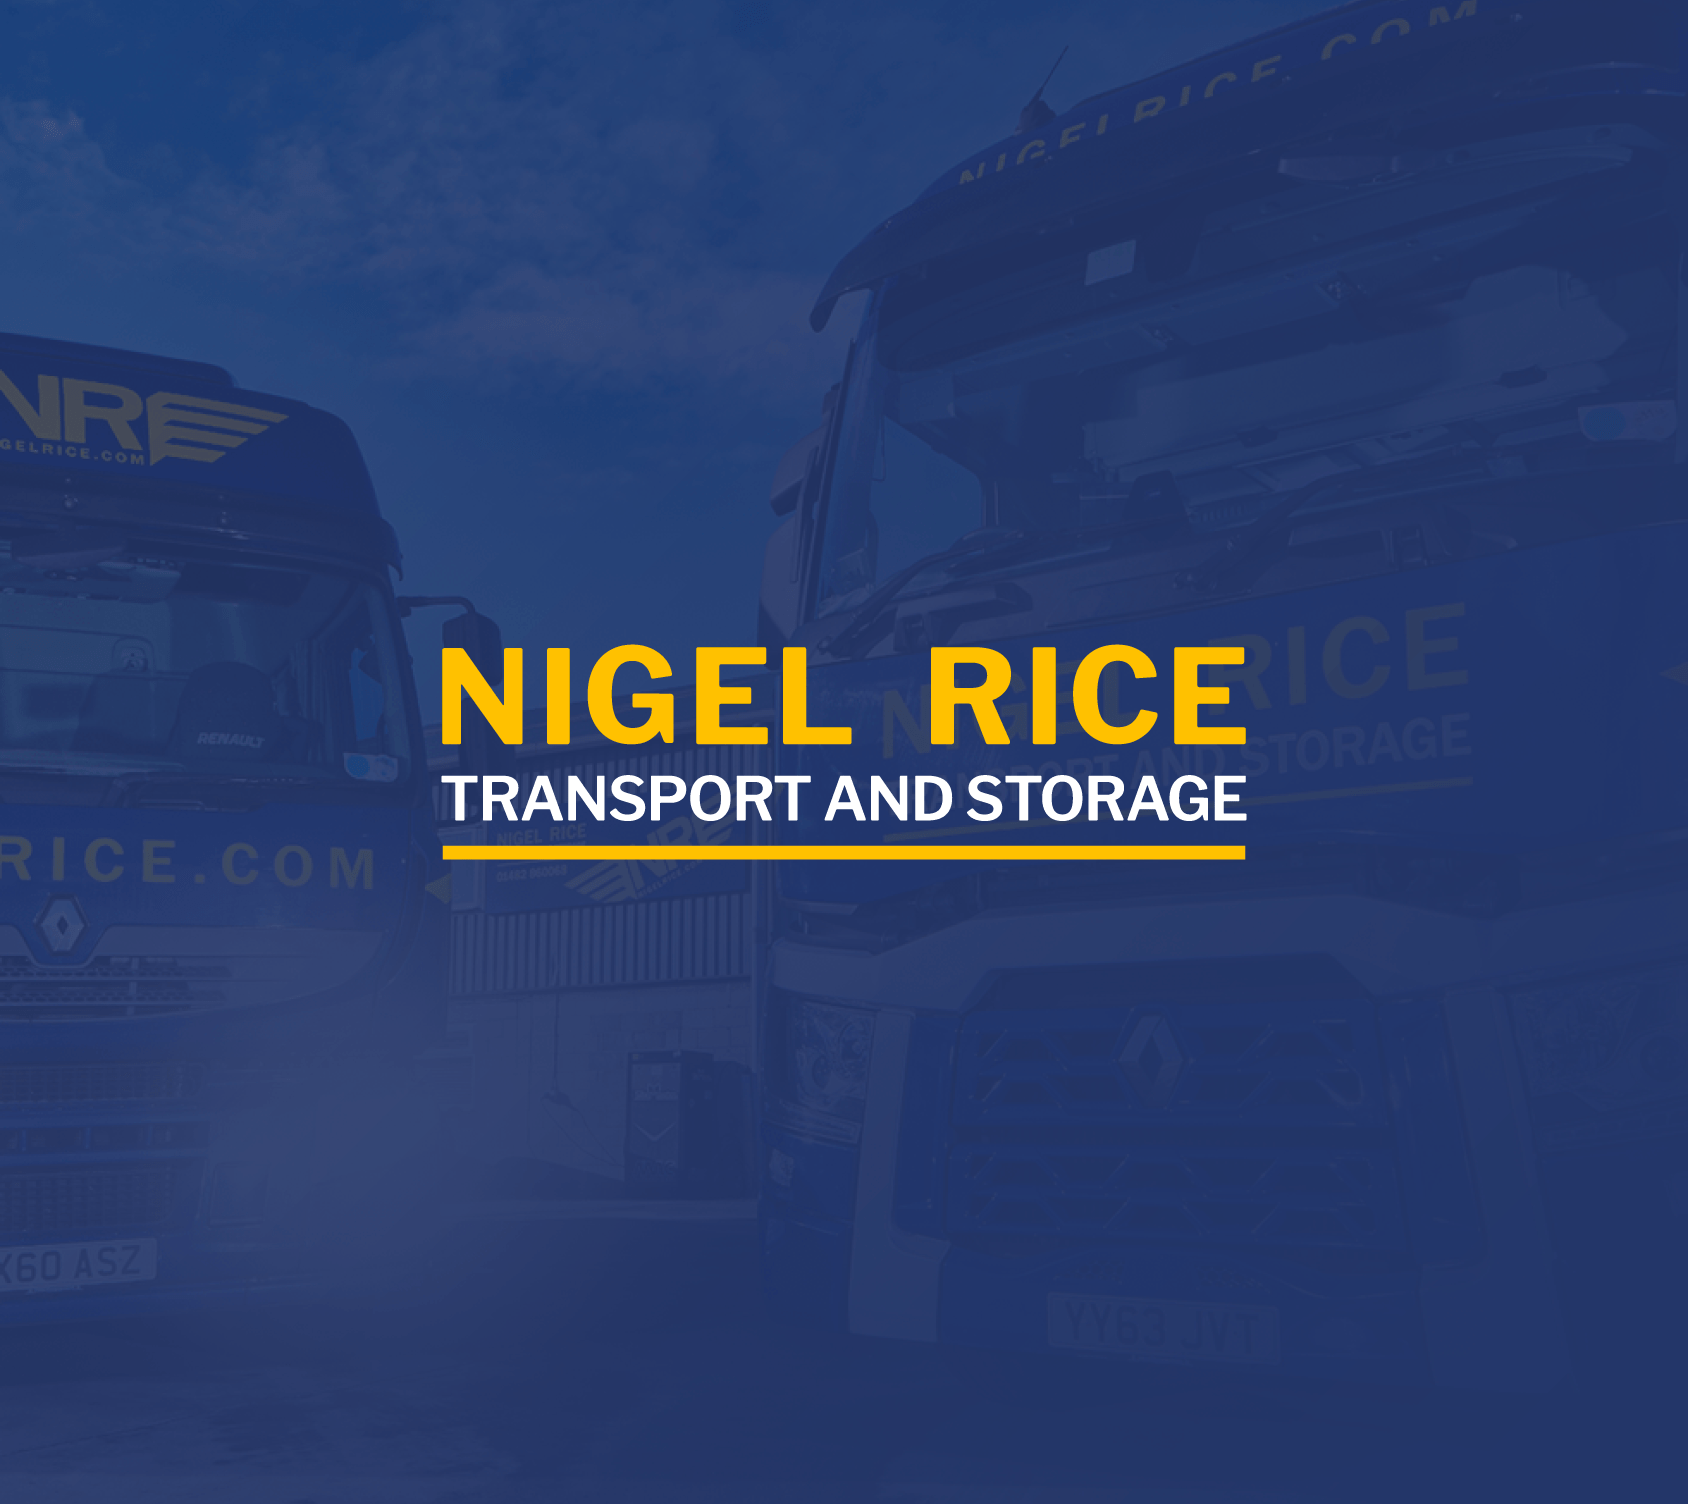 Hazardous Delivery Service in Hull, ADR Delivery Hull, Nigel Rice